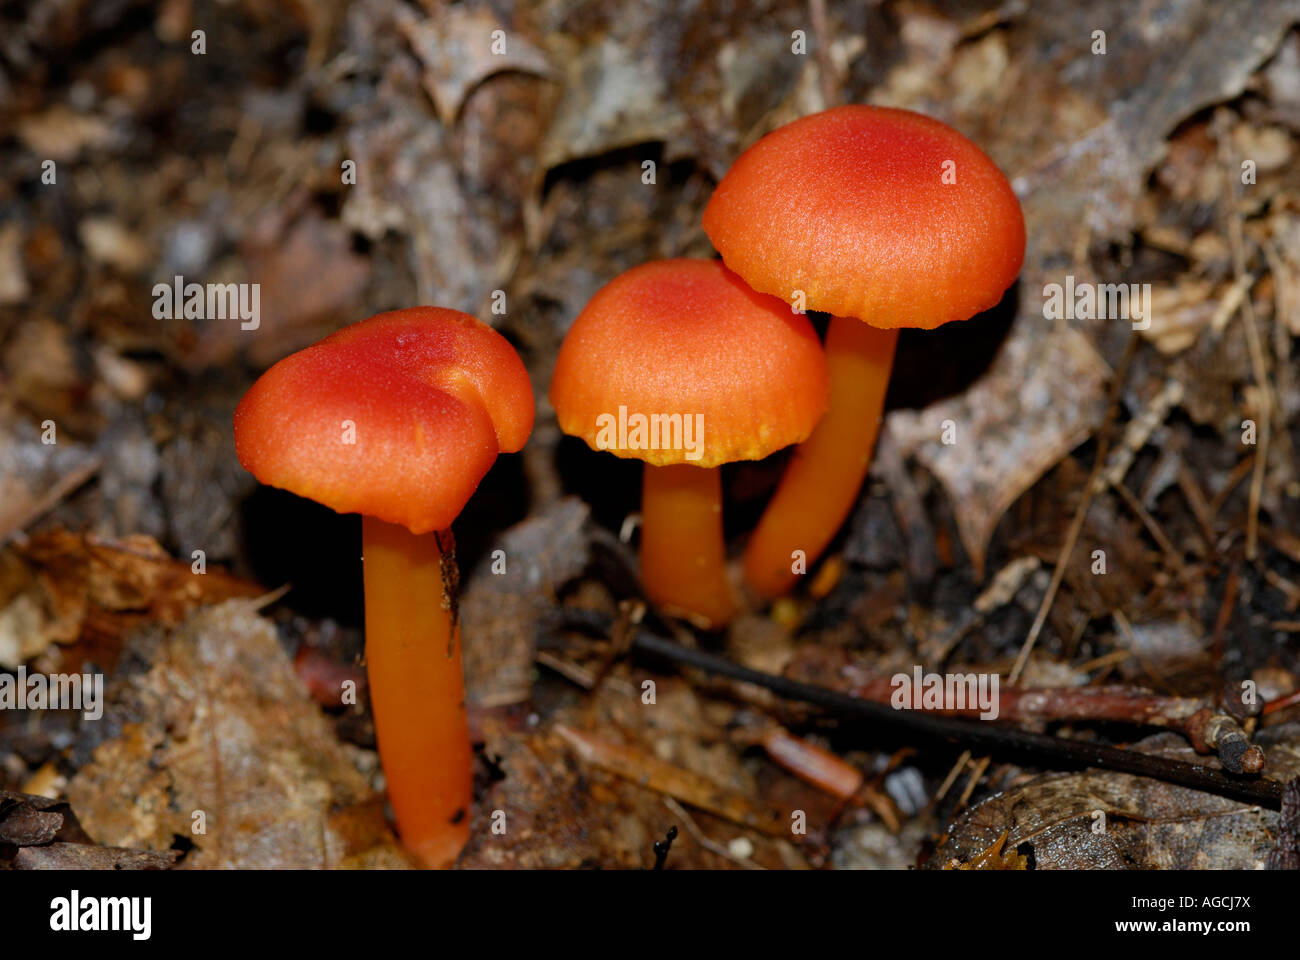 Hygrophorus sp mushrooms growing in a northern New Jersey woodland Stock Photo